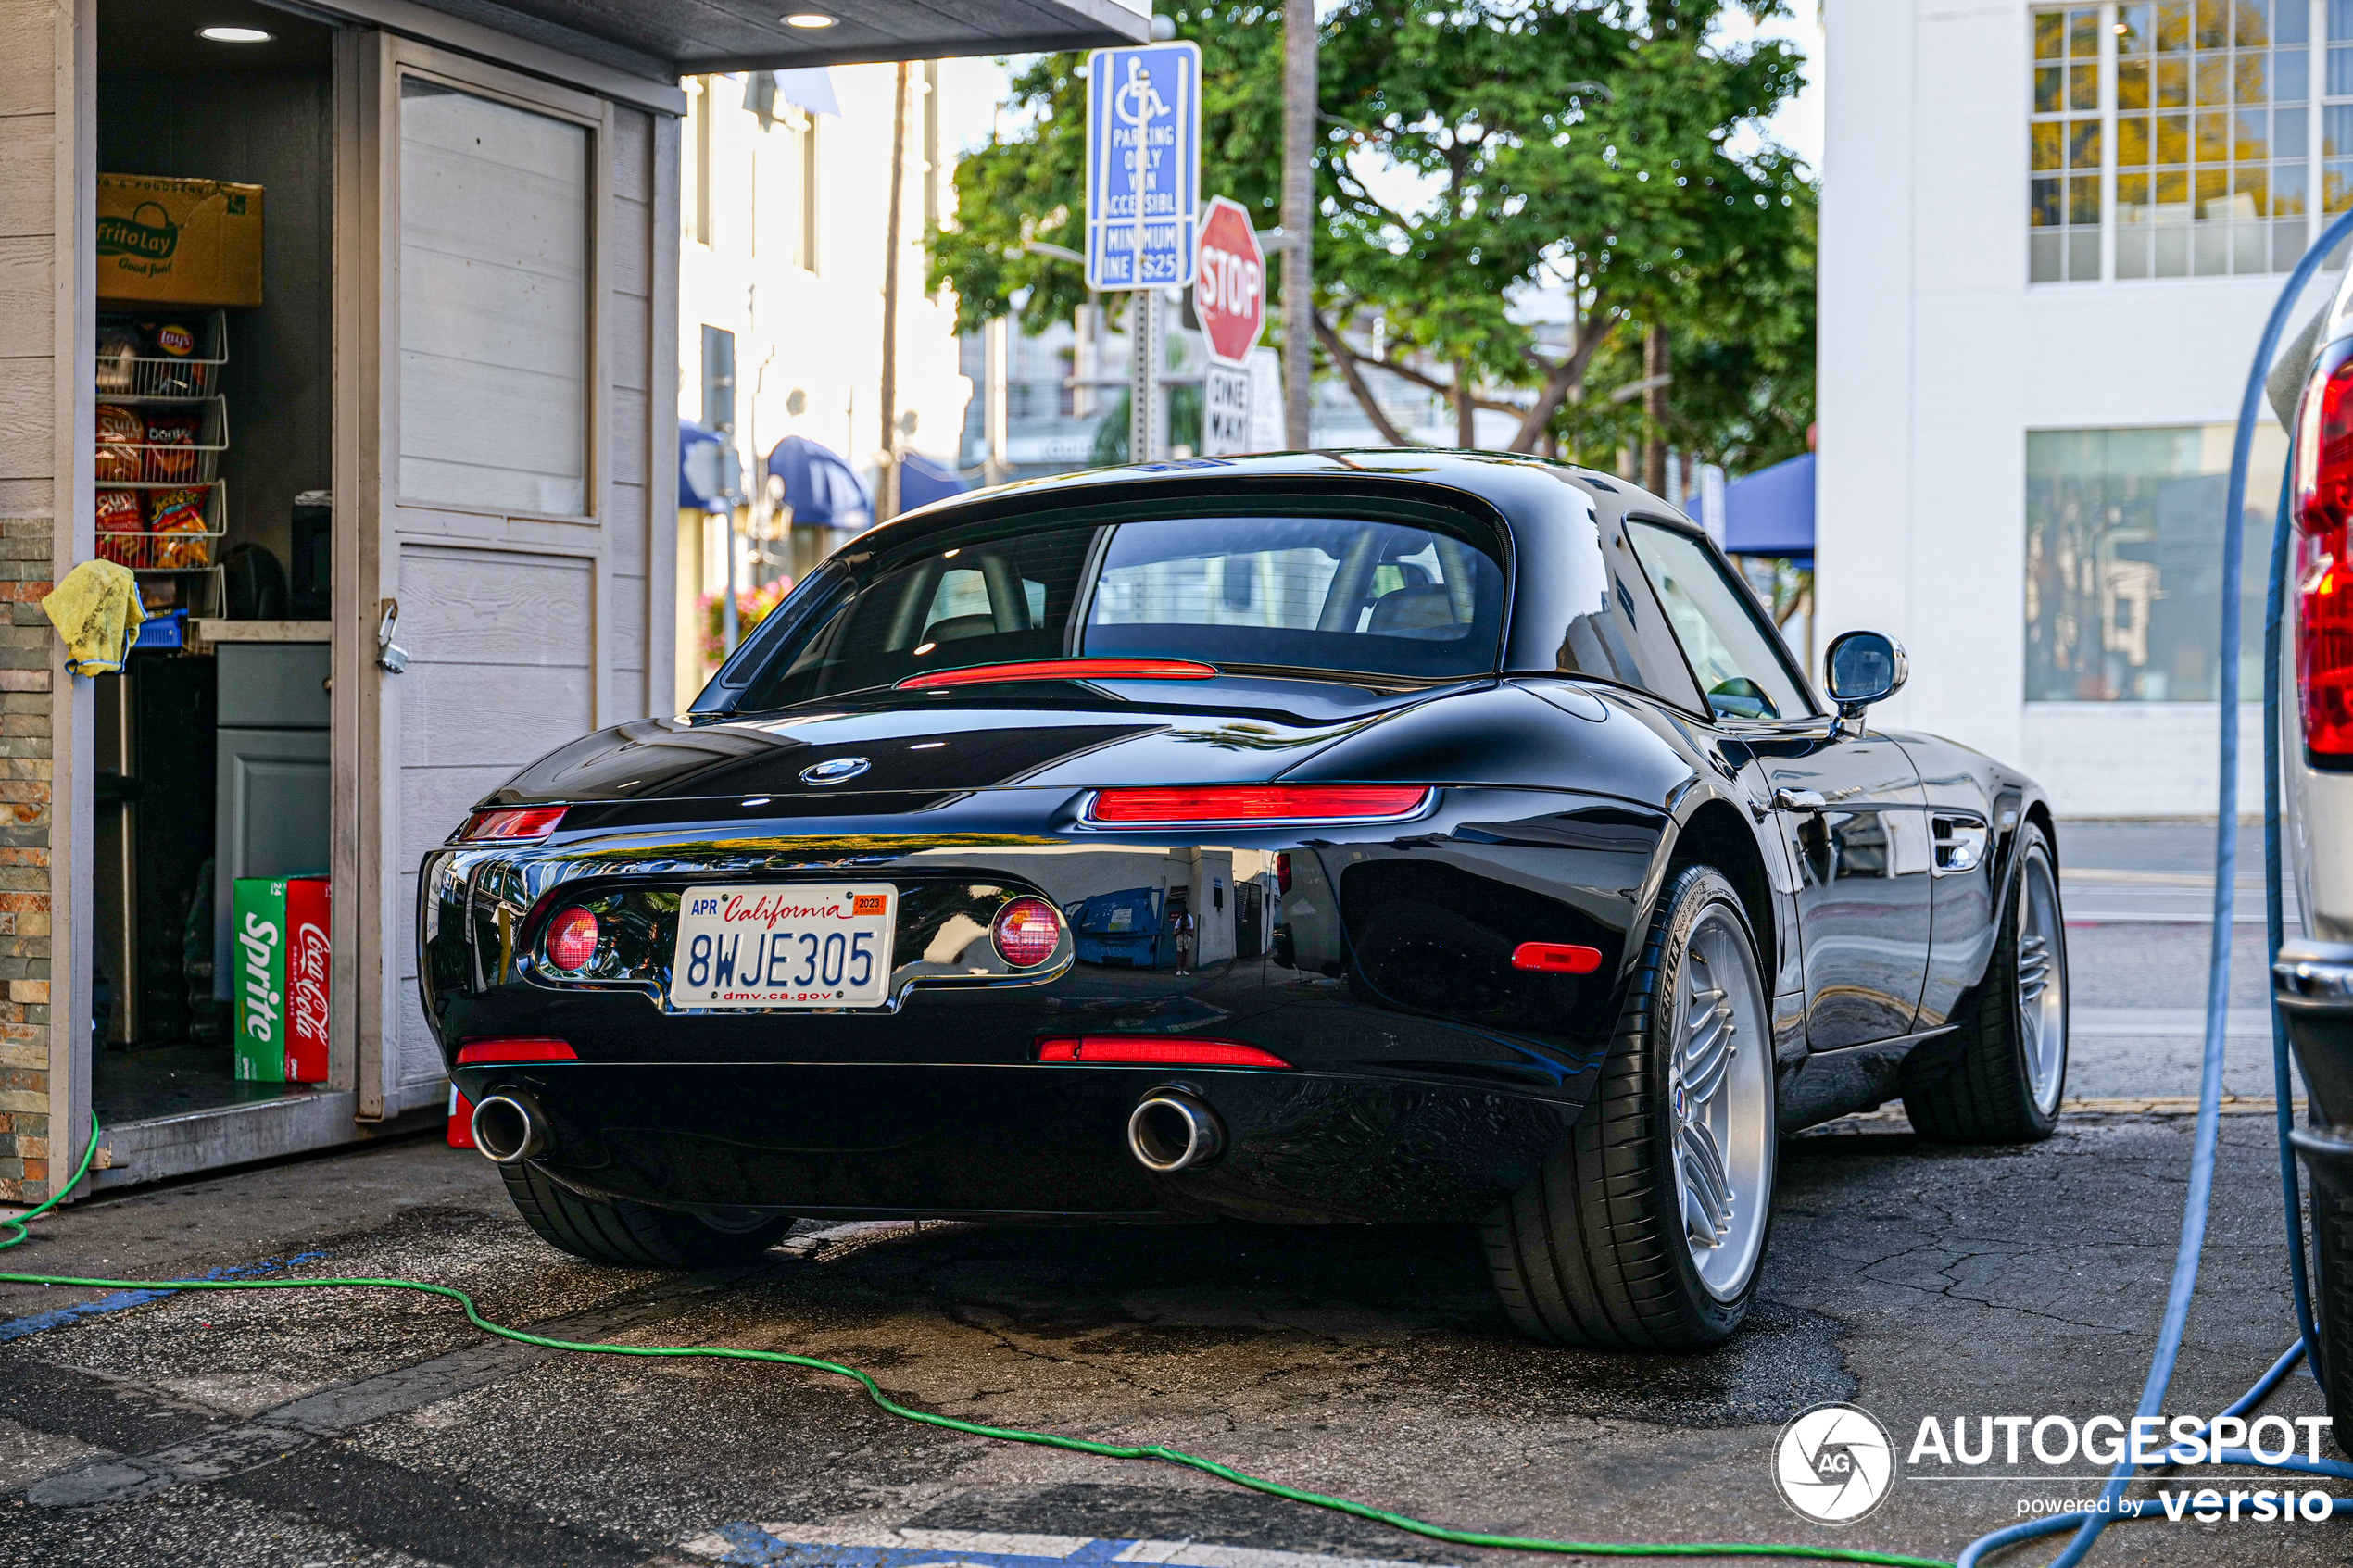 A beautiful Z8 shows up in Beverly Hills